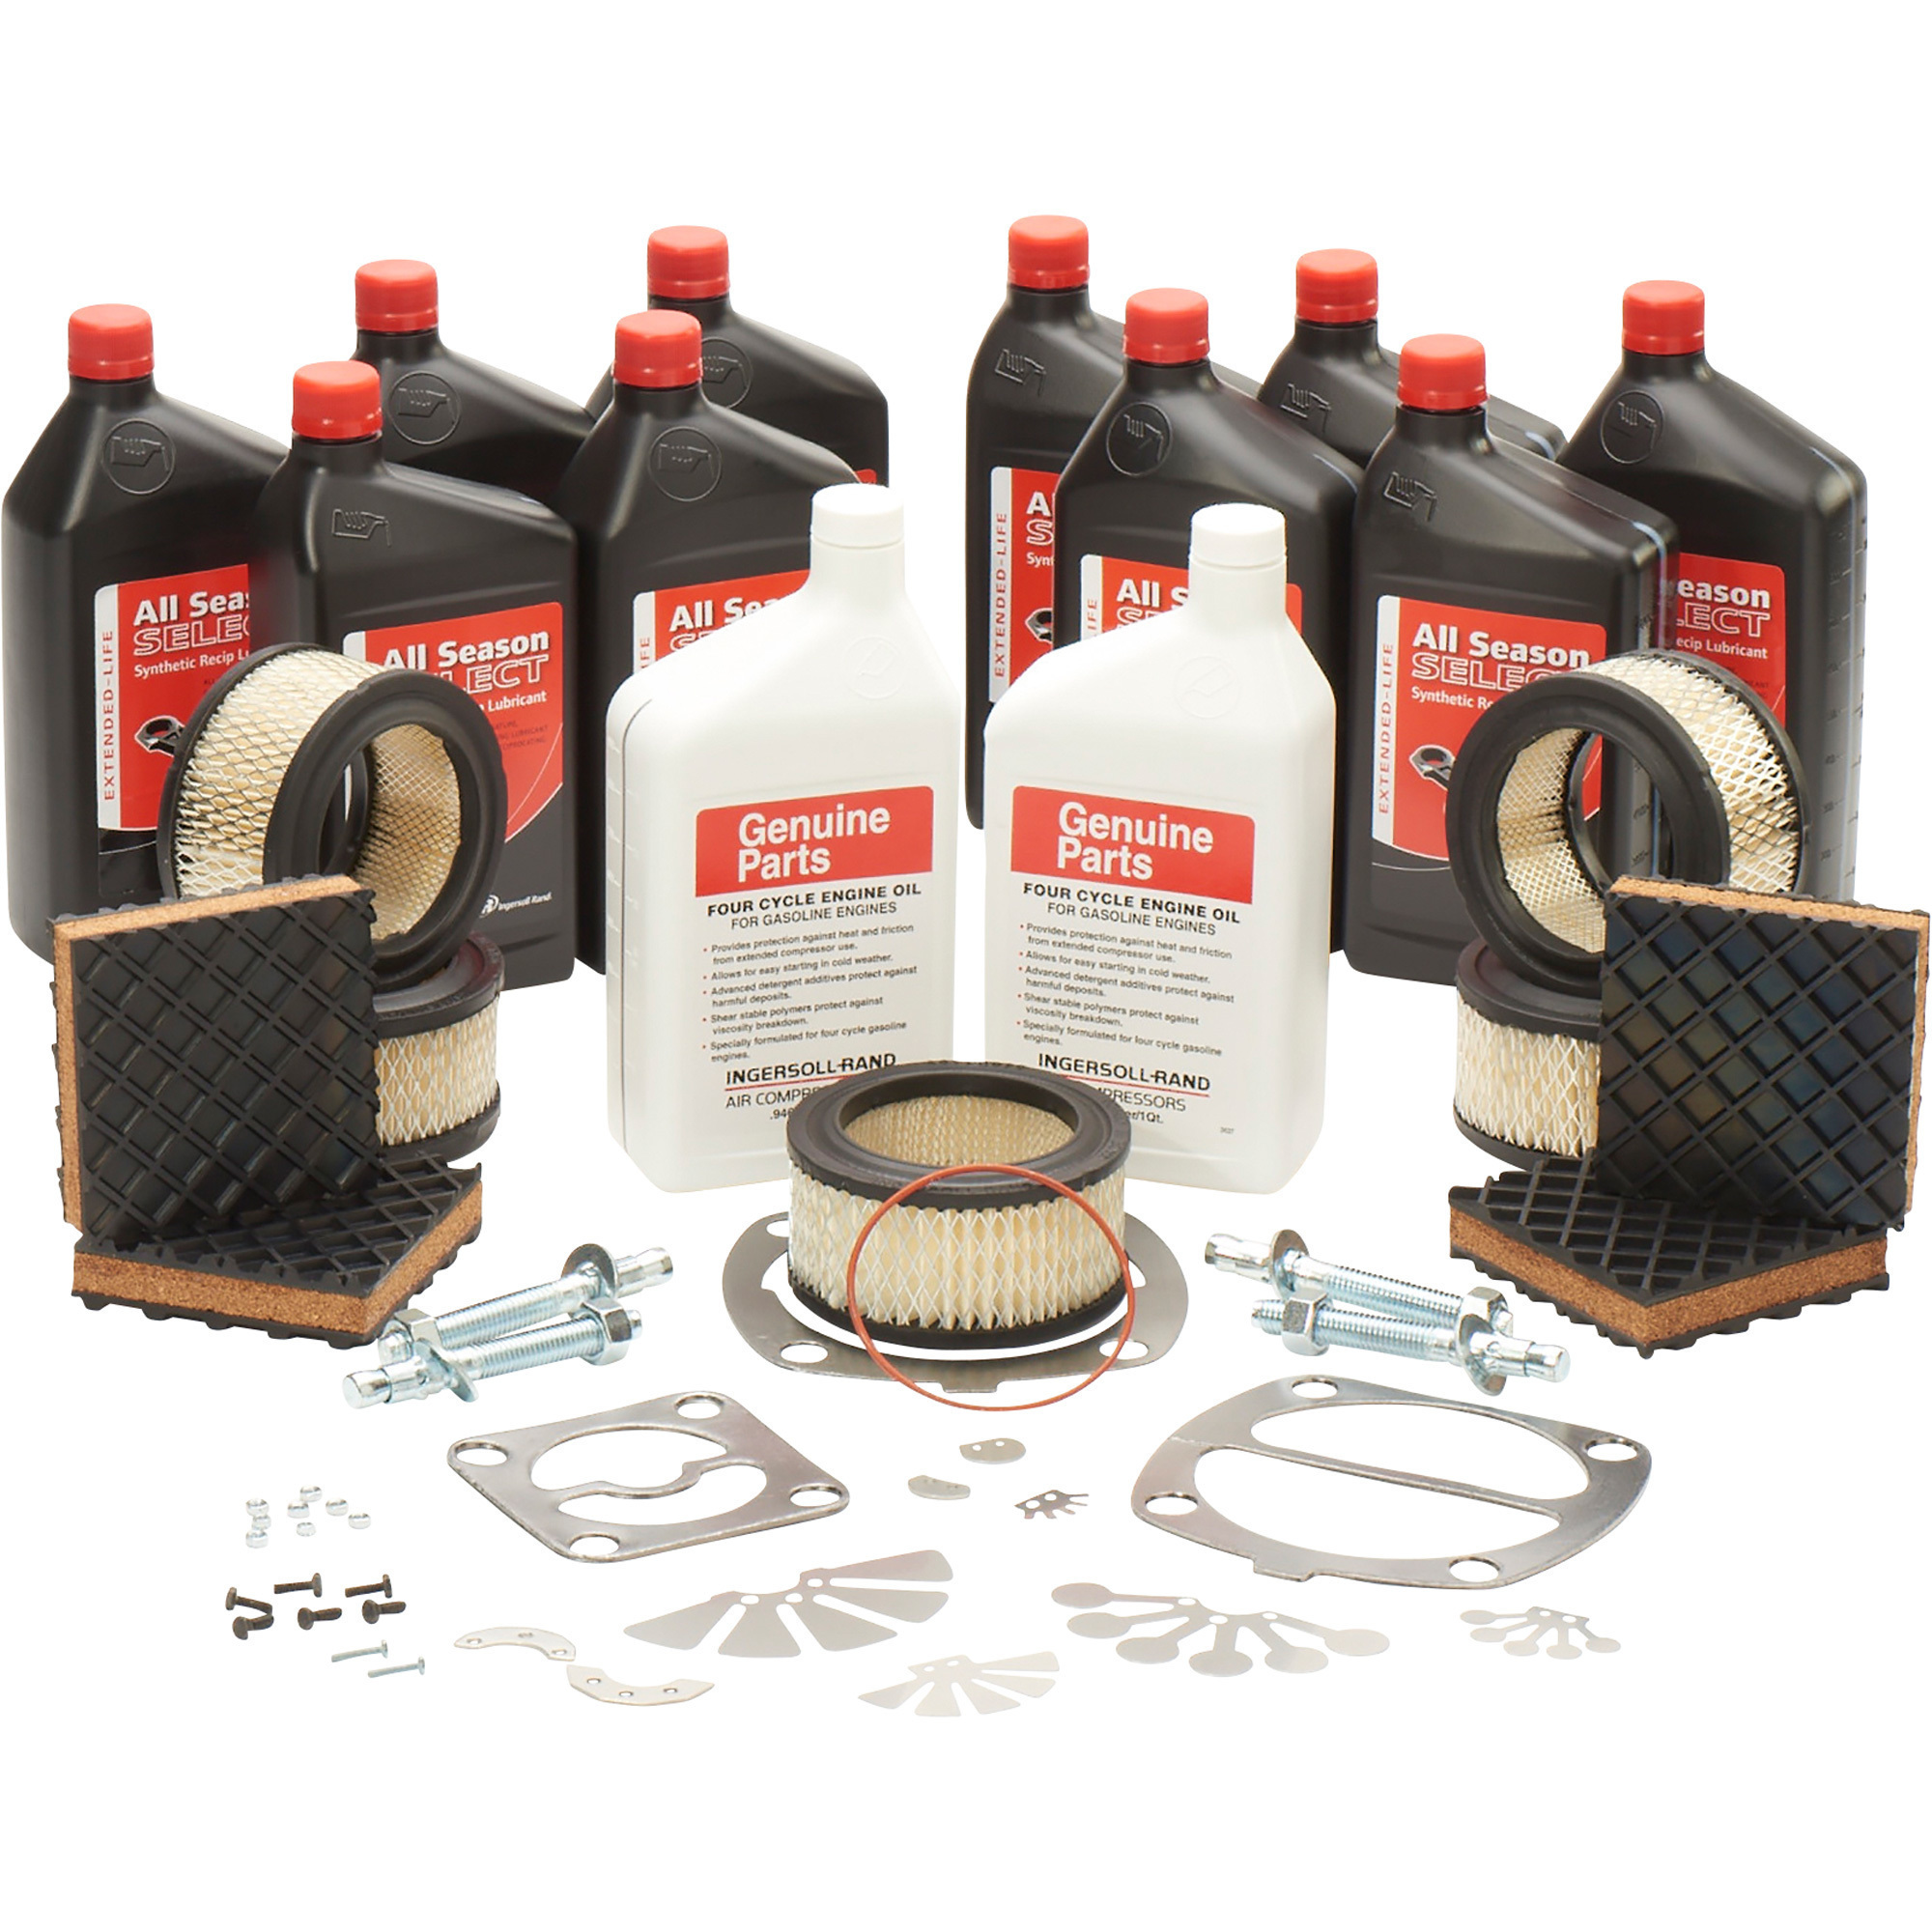 Ingersoll Rand Extended Support and Maintenance Kit, For IR Model 2475 Air Compressor Pumps With a Honda Gas Engine, Model 47625142001